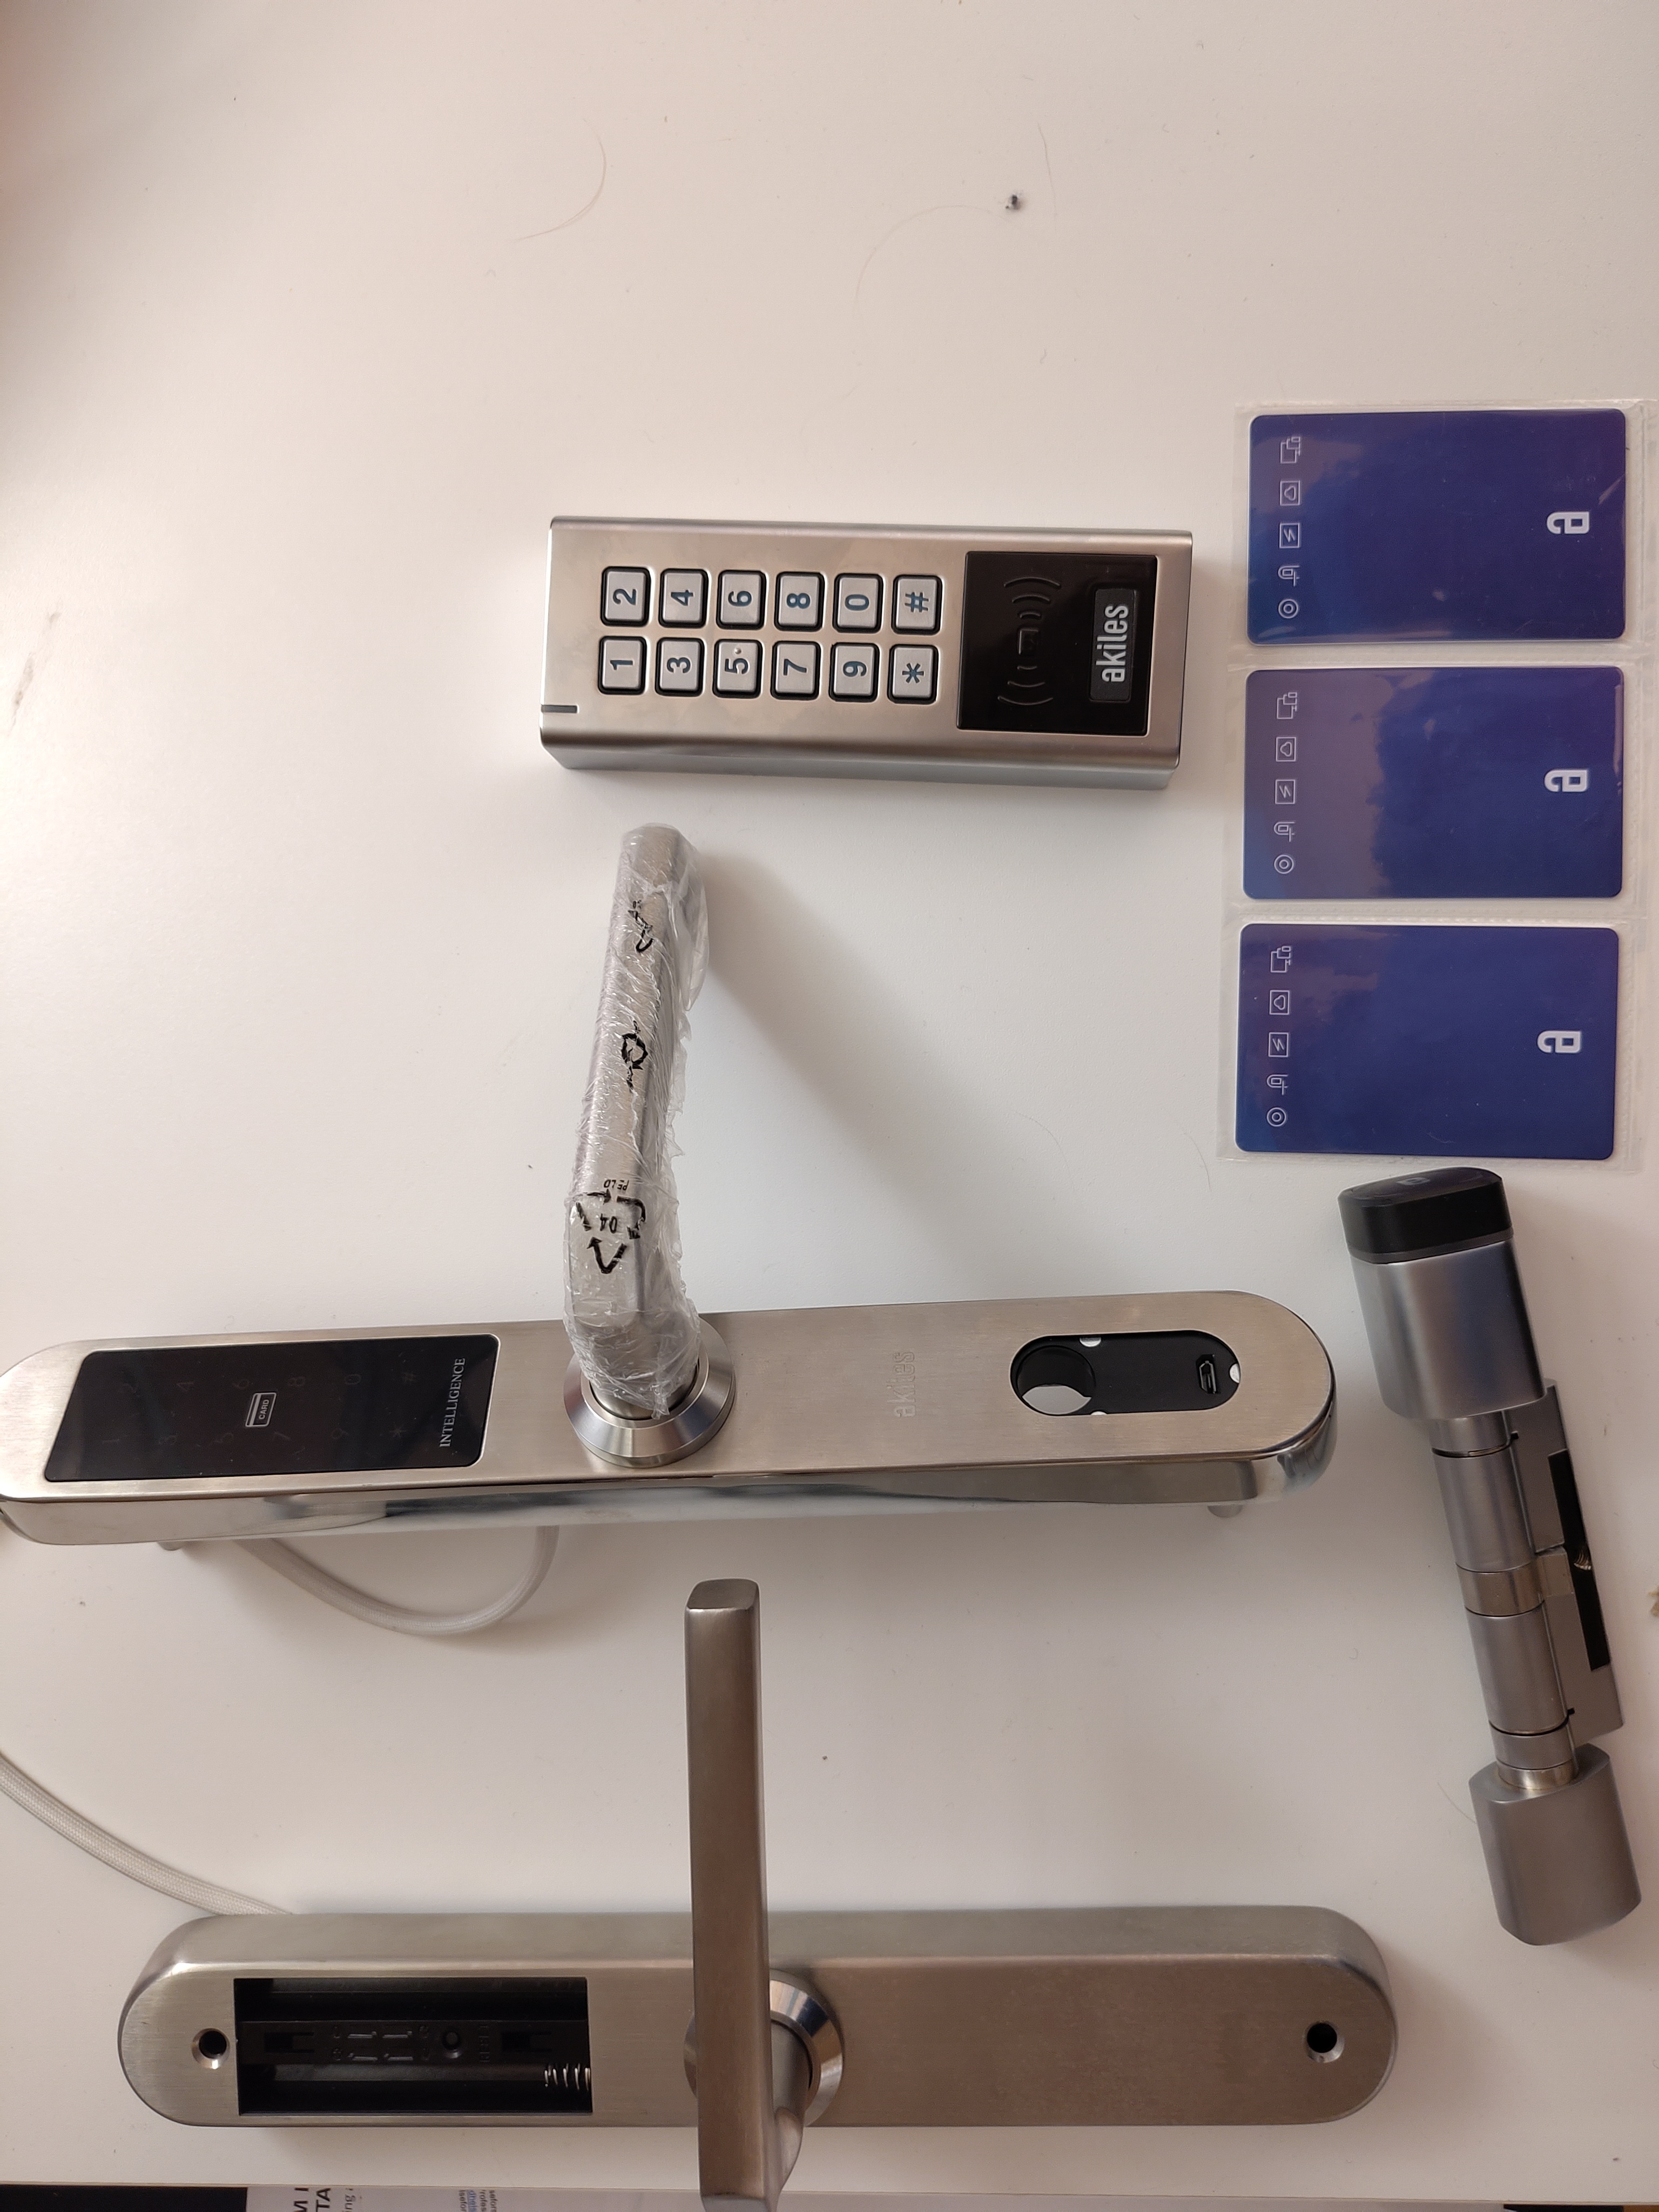 A photo showing the different Akiles products like cylinder lock, interior doorlock and some example access cards